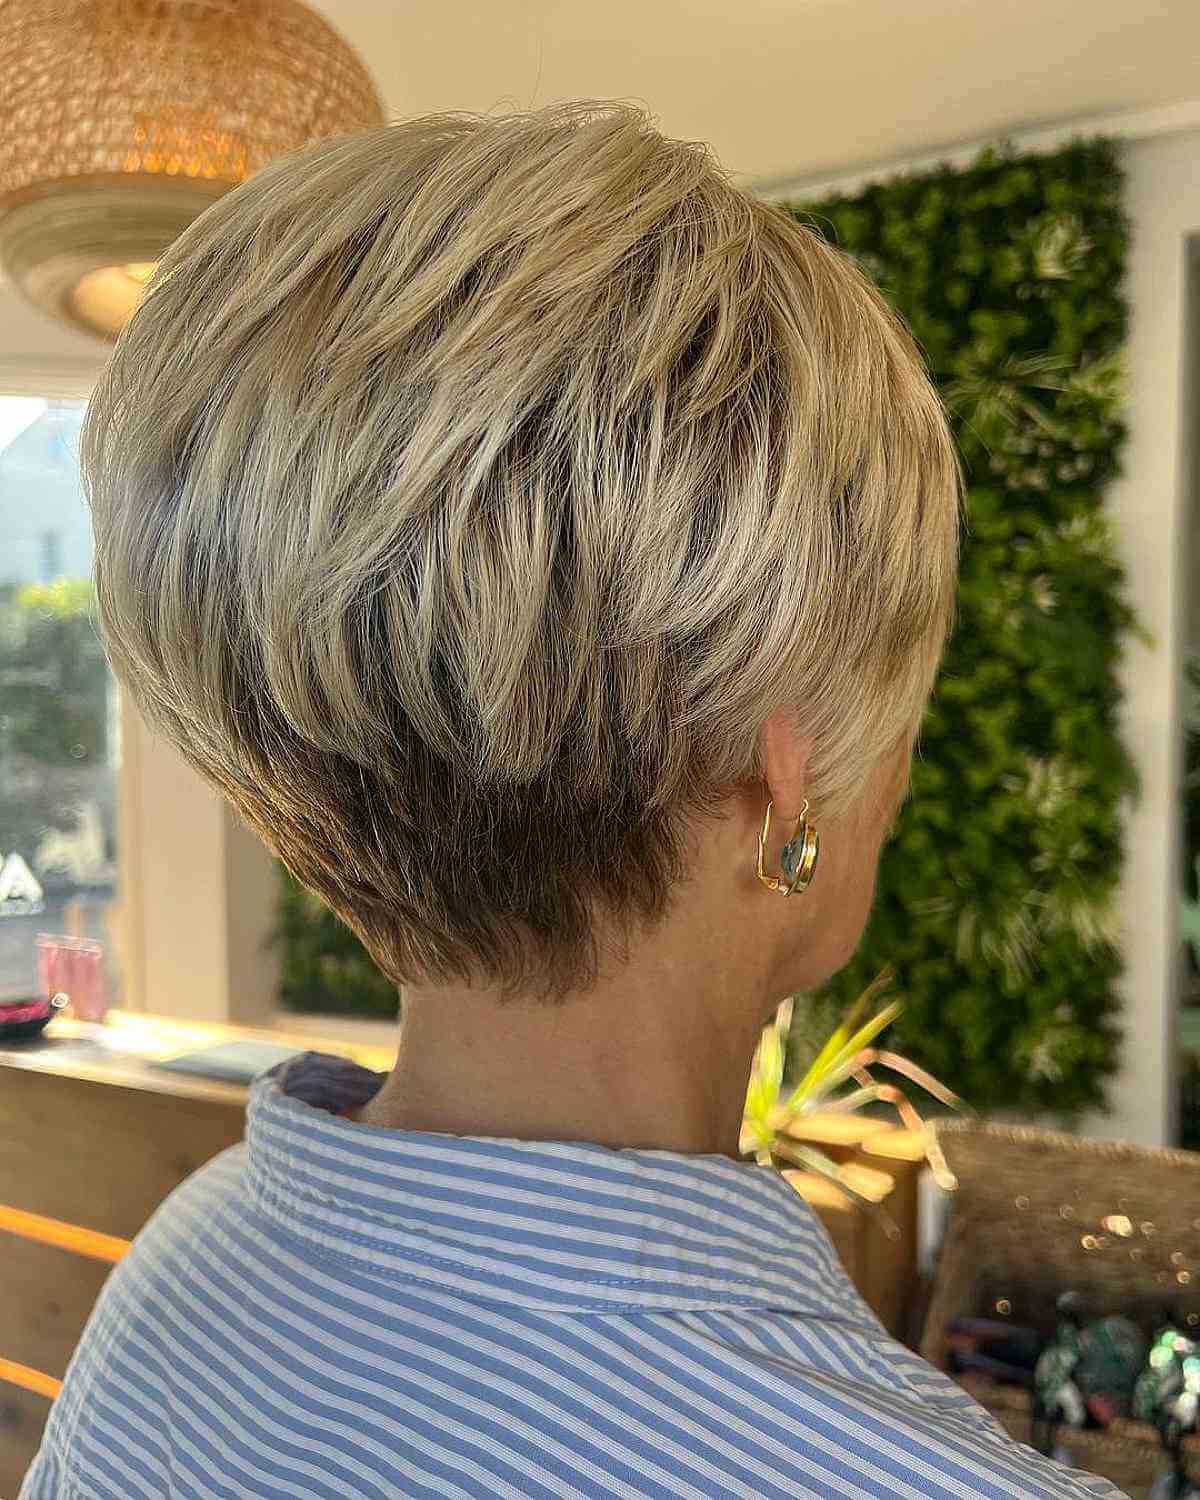 Lovely Tapered Bixie con raíces oscuras